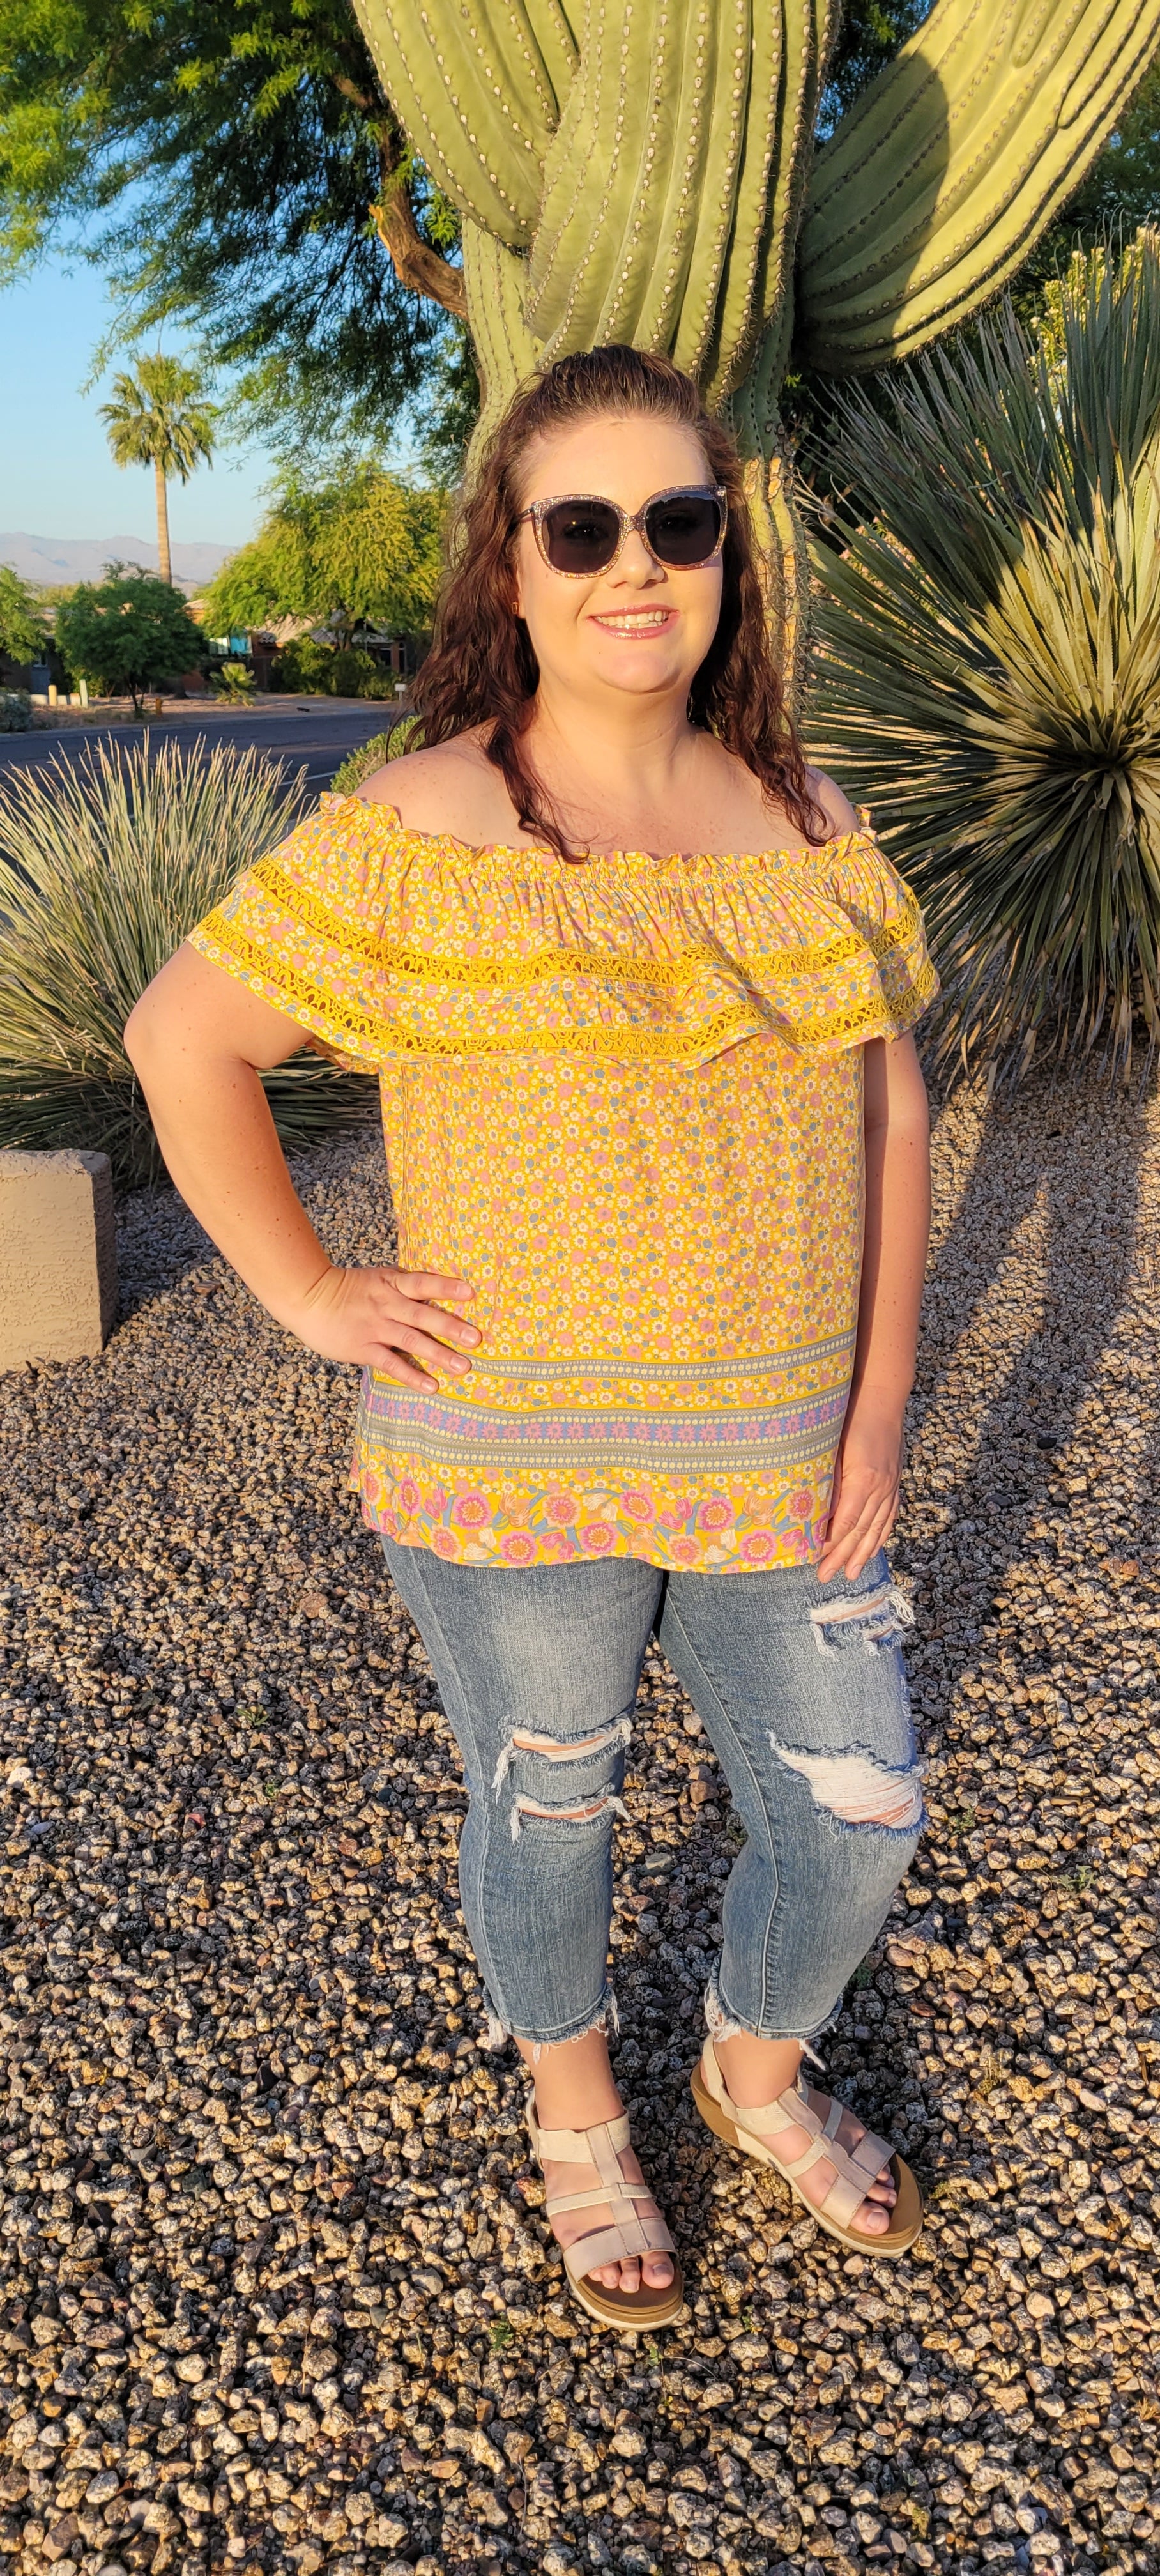 “Sunshine On My Shoulders” is an off the shoulder smock top. This top features a ray of subdued colors (dandelion yellow, mauve, ceil blue, white), elastic ruffled neckline, and crochet lace design. This top is a longer length, it does not have stretch, and is super lightweight and breathable. Sizes small through large.